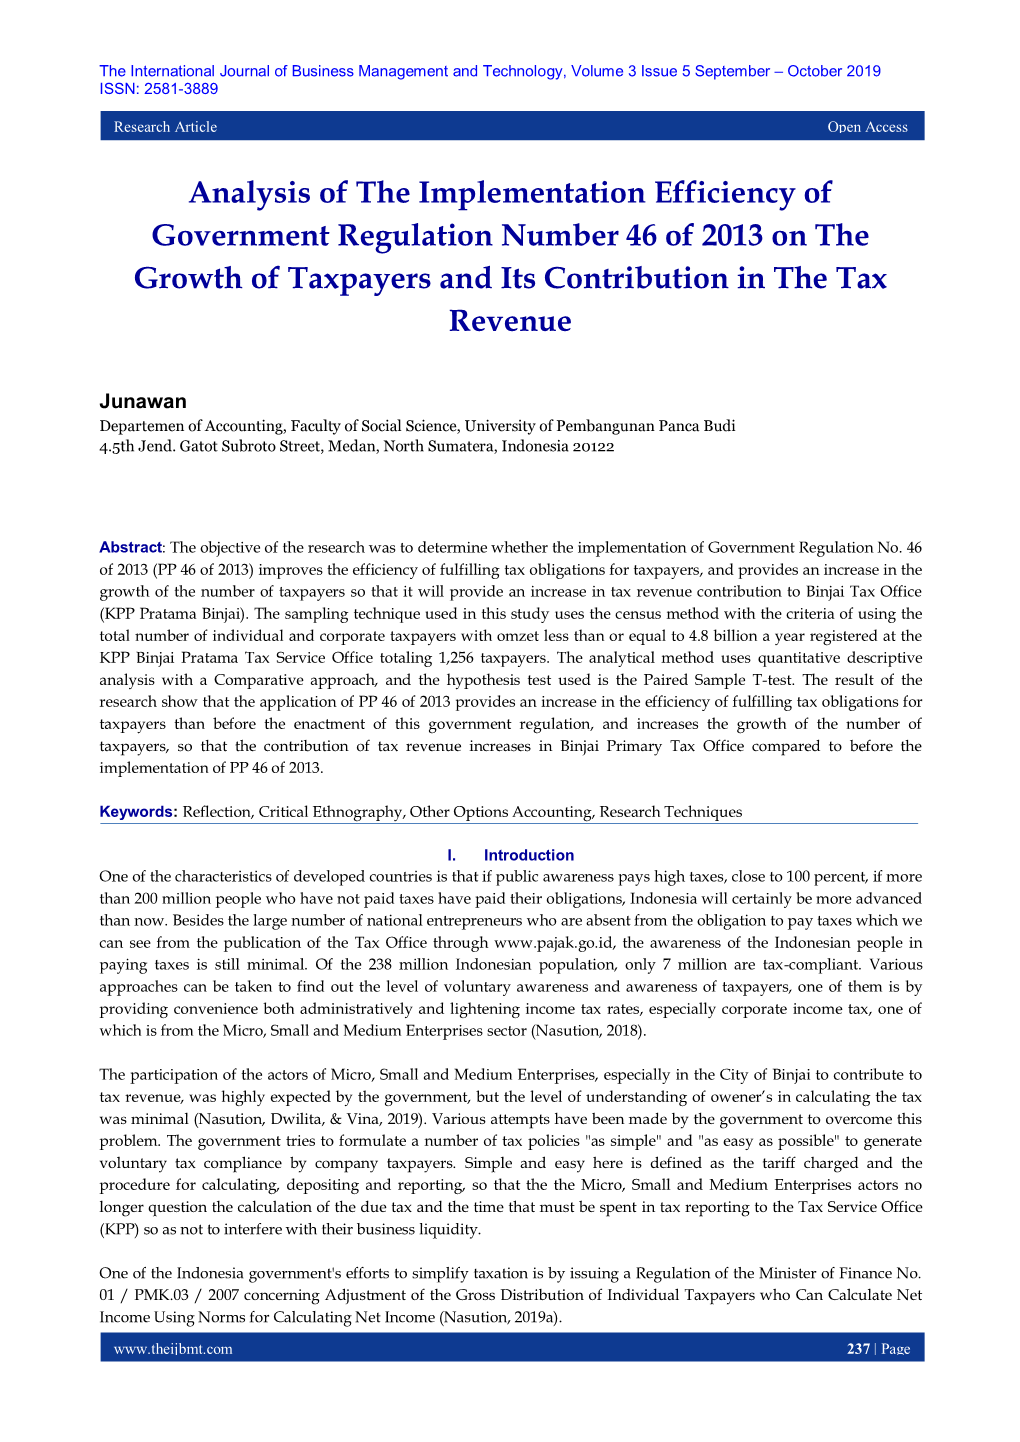 Analysis of the Implementation Efficiency of Government Regulation Number 46 of 2013 on the Growth of Taxpayers and Its Contribution in the Tax Revenue